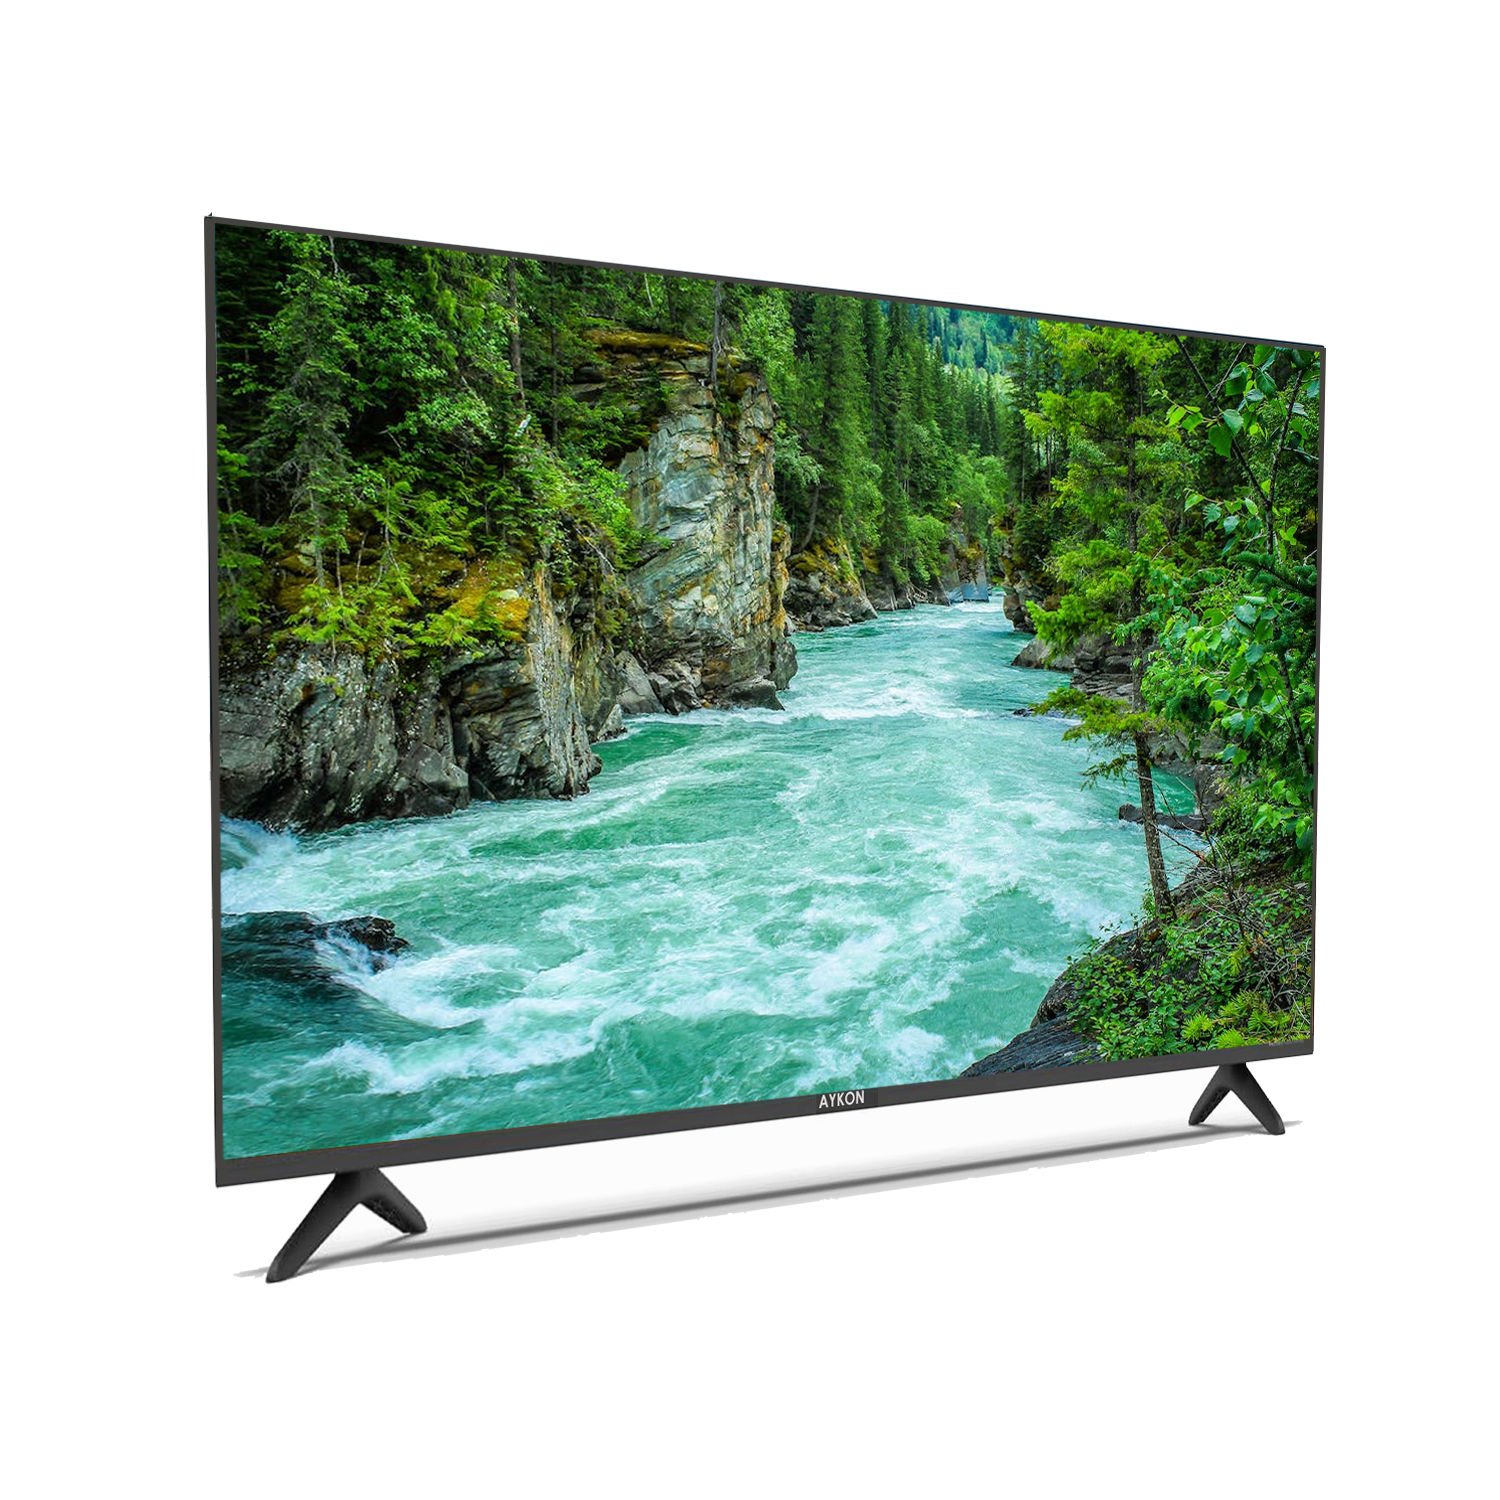 40 Inch LED Television